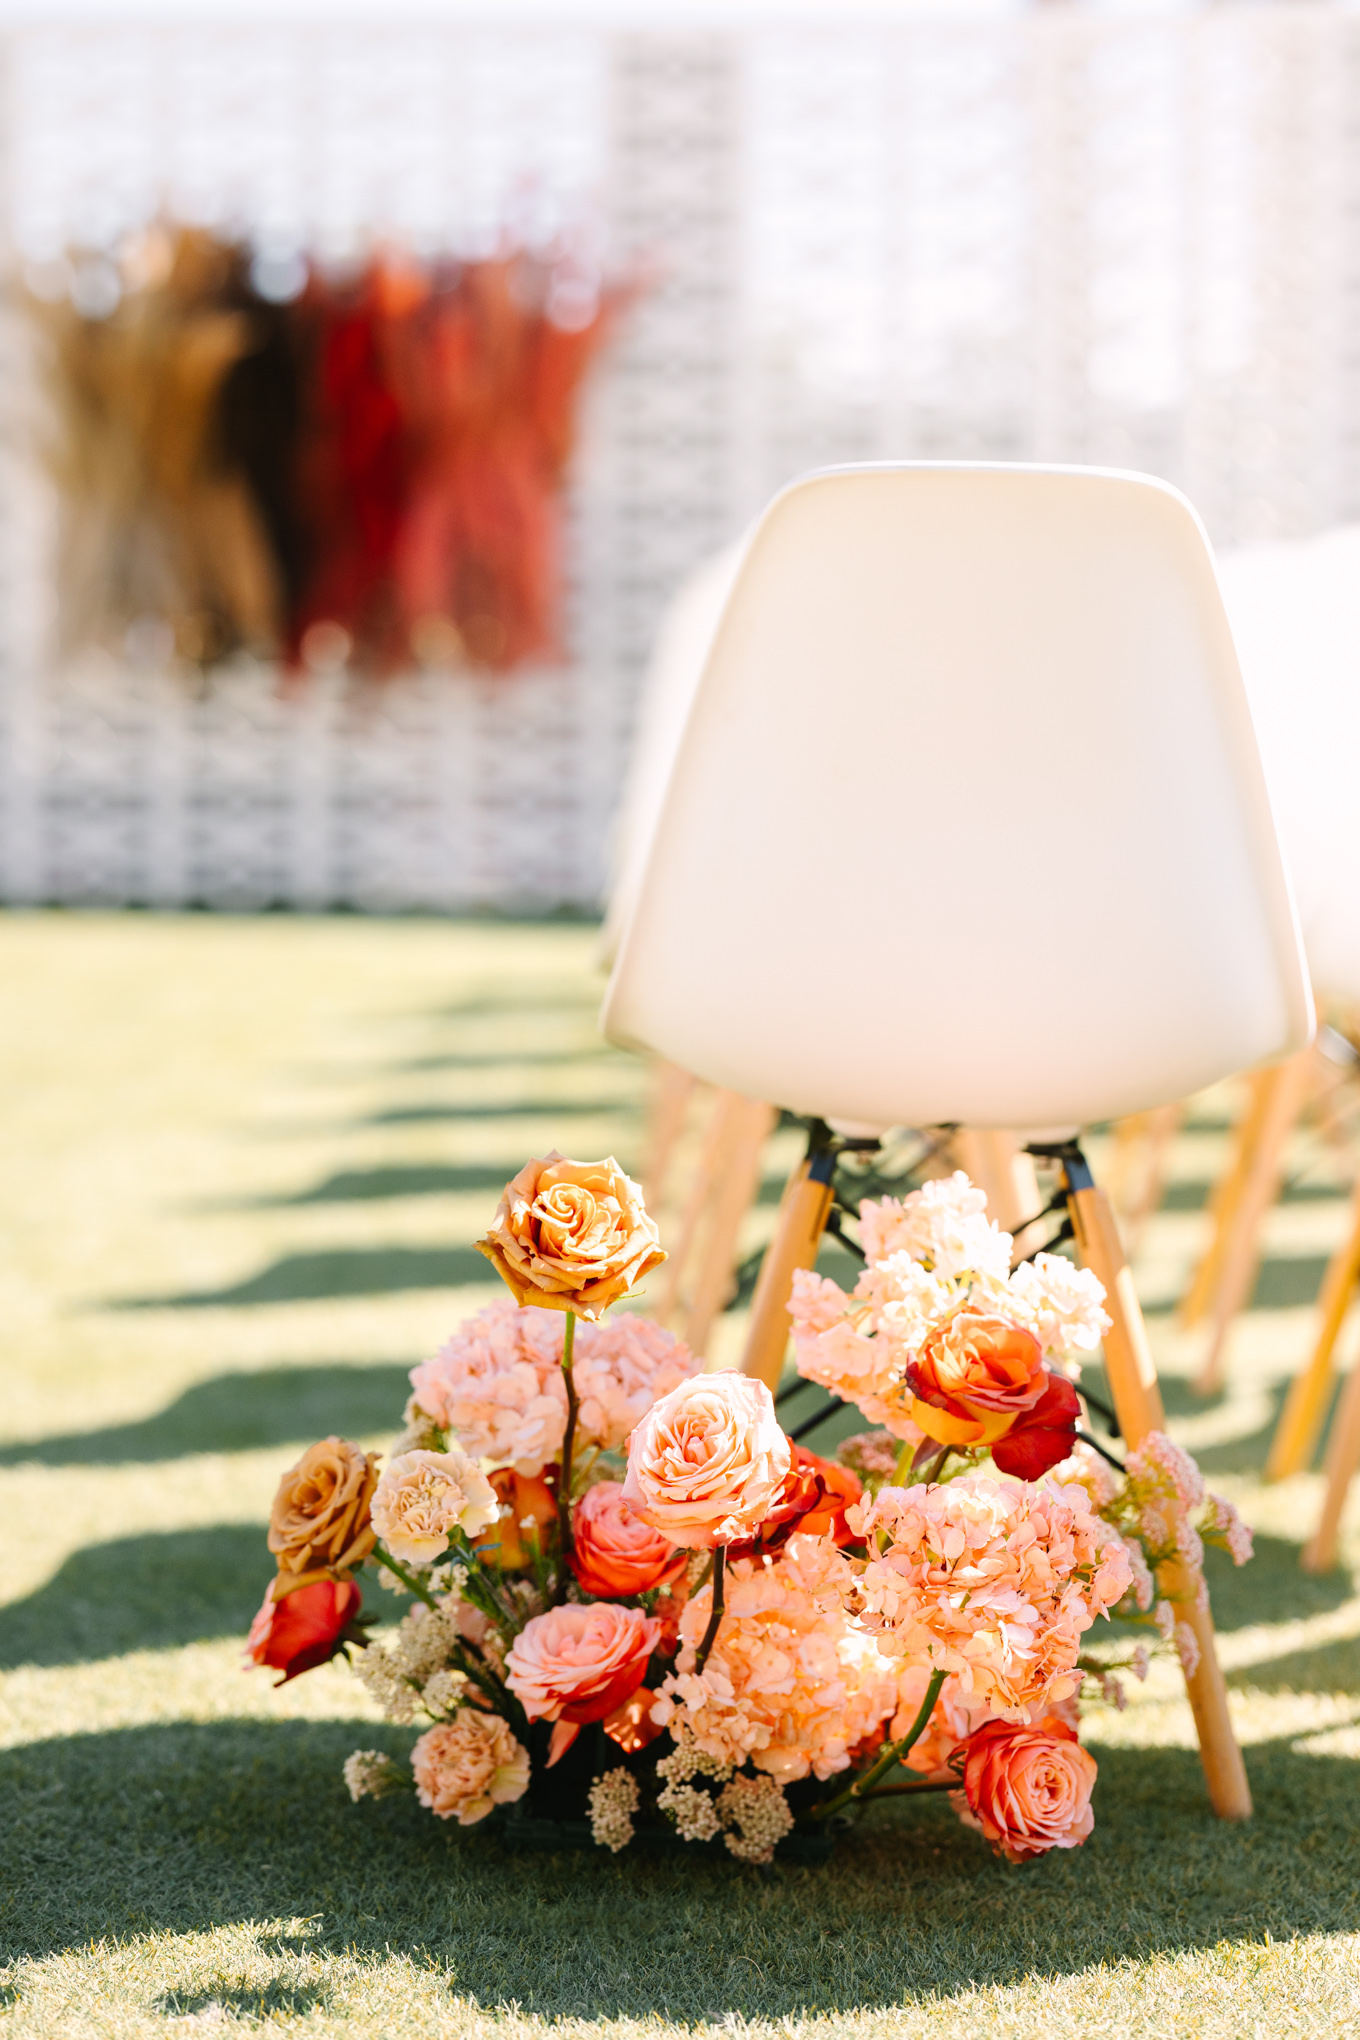 Orange, pink and red floral arrangement | Pink and orange Lautner Compound wedding | Colorful Palm Springs wedding photography | #palmspringsphotographer #palmspringswedding #lautnercompound #southerncaliforniawedding  Source: Mary Costa Photography | Los Angeles